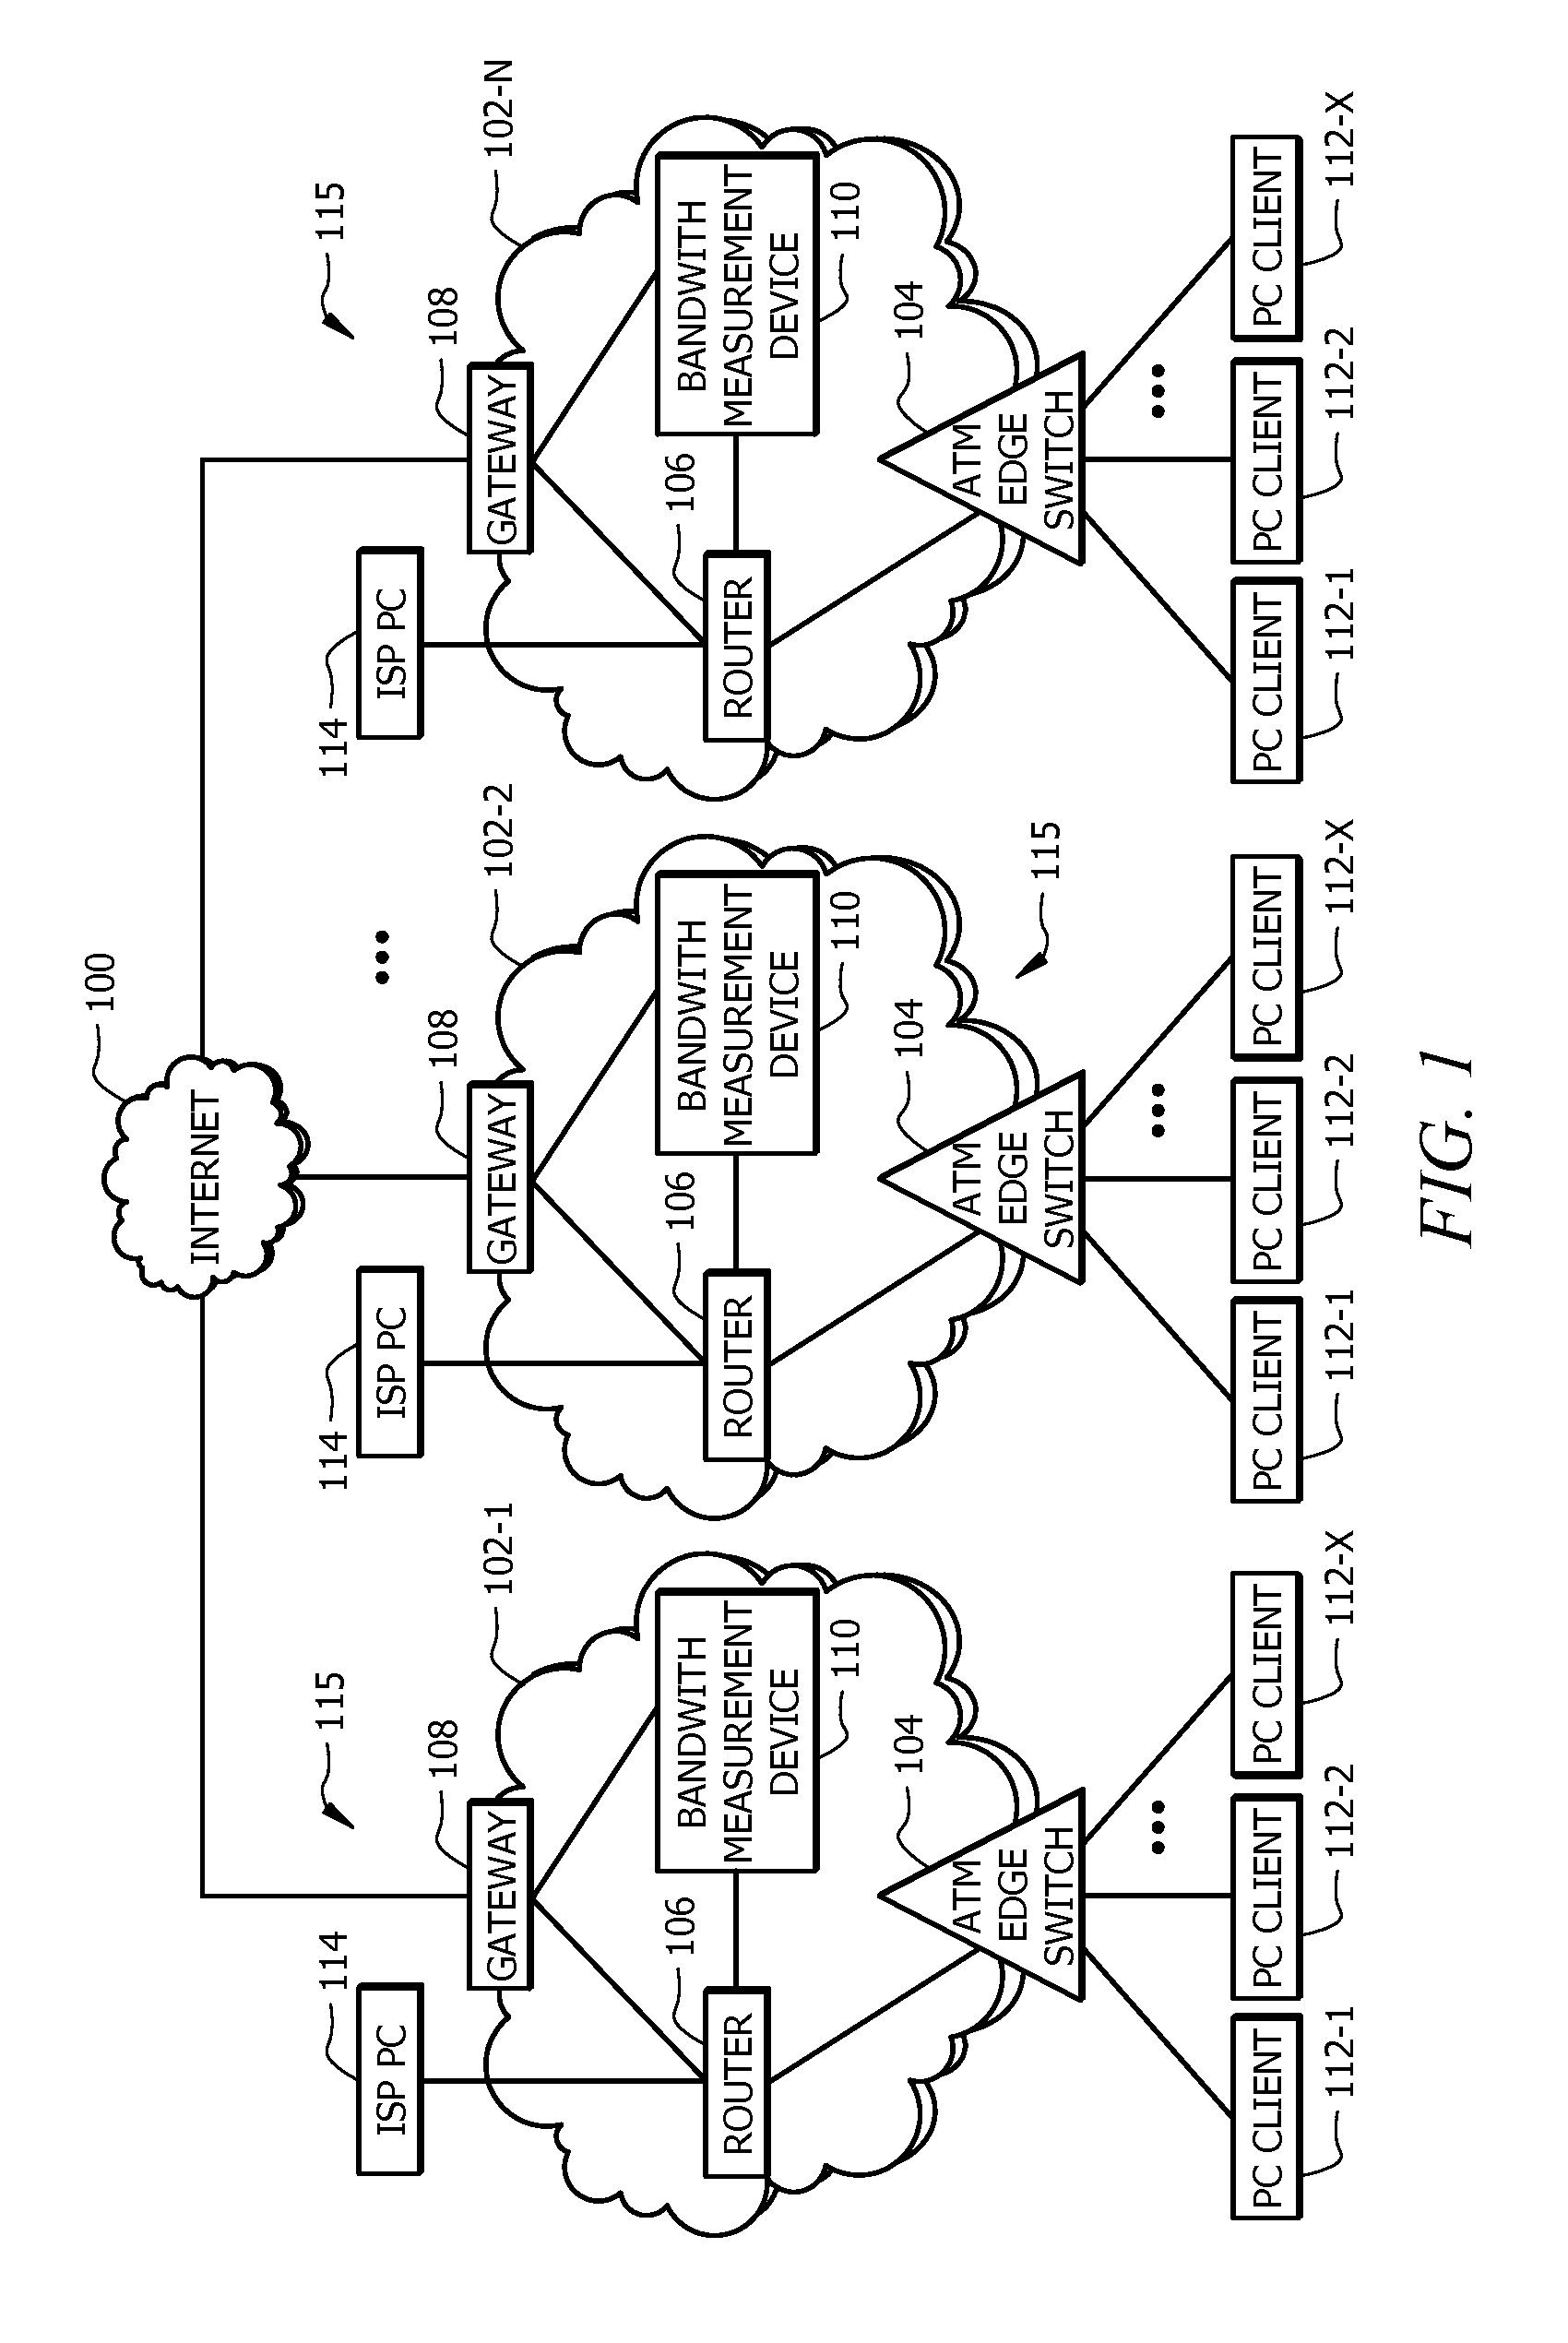 Internet service node incorporating a bandwidth measurement device and associated methods for evaluating data transfers